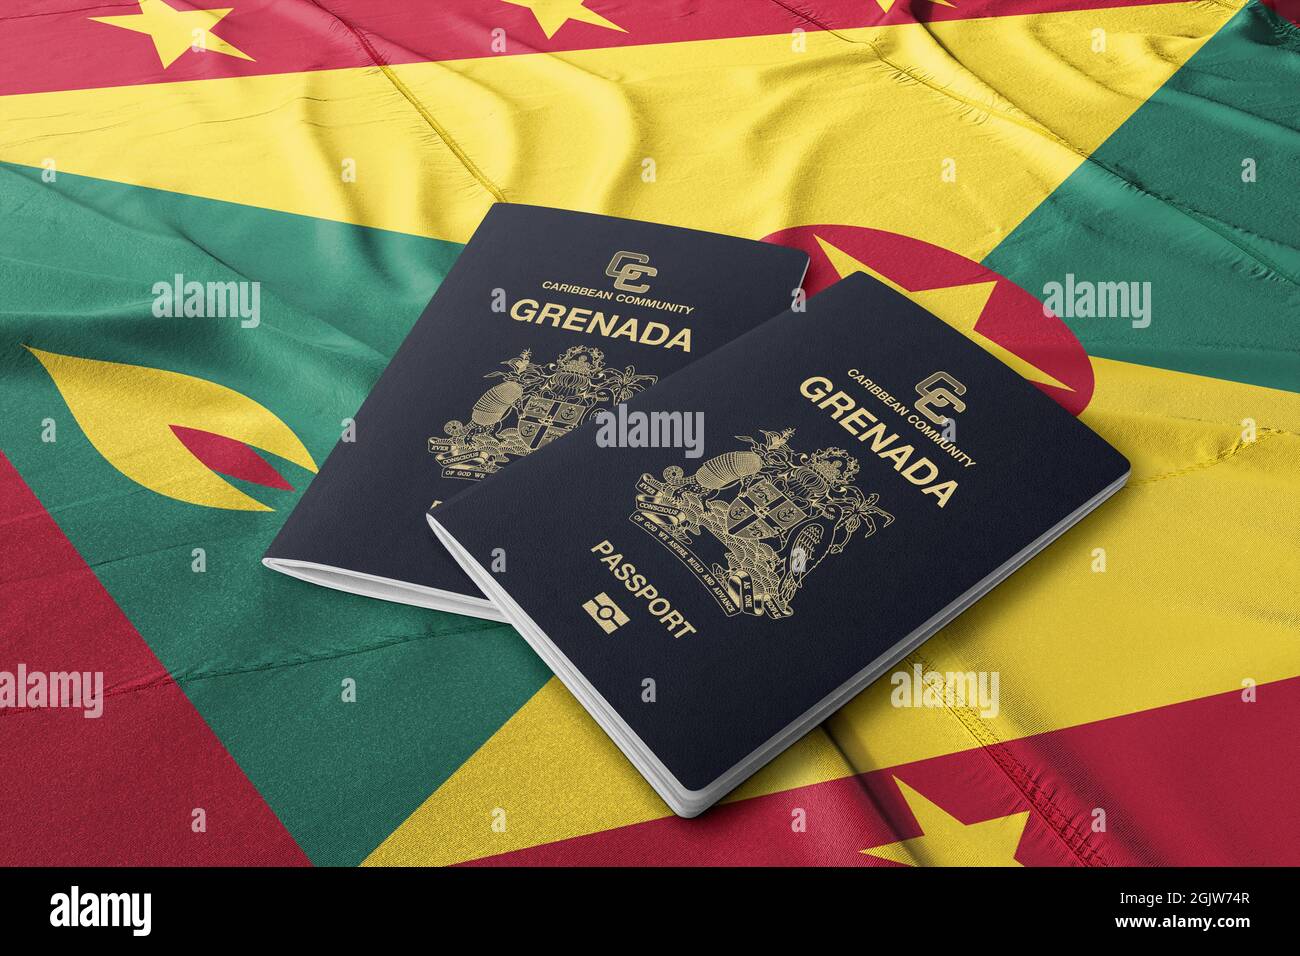 Grenada Passport with Grenada Flag, Citizenship by Investment, Caribbean Country Stock Photo